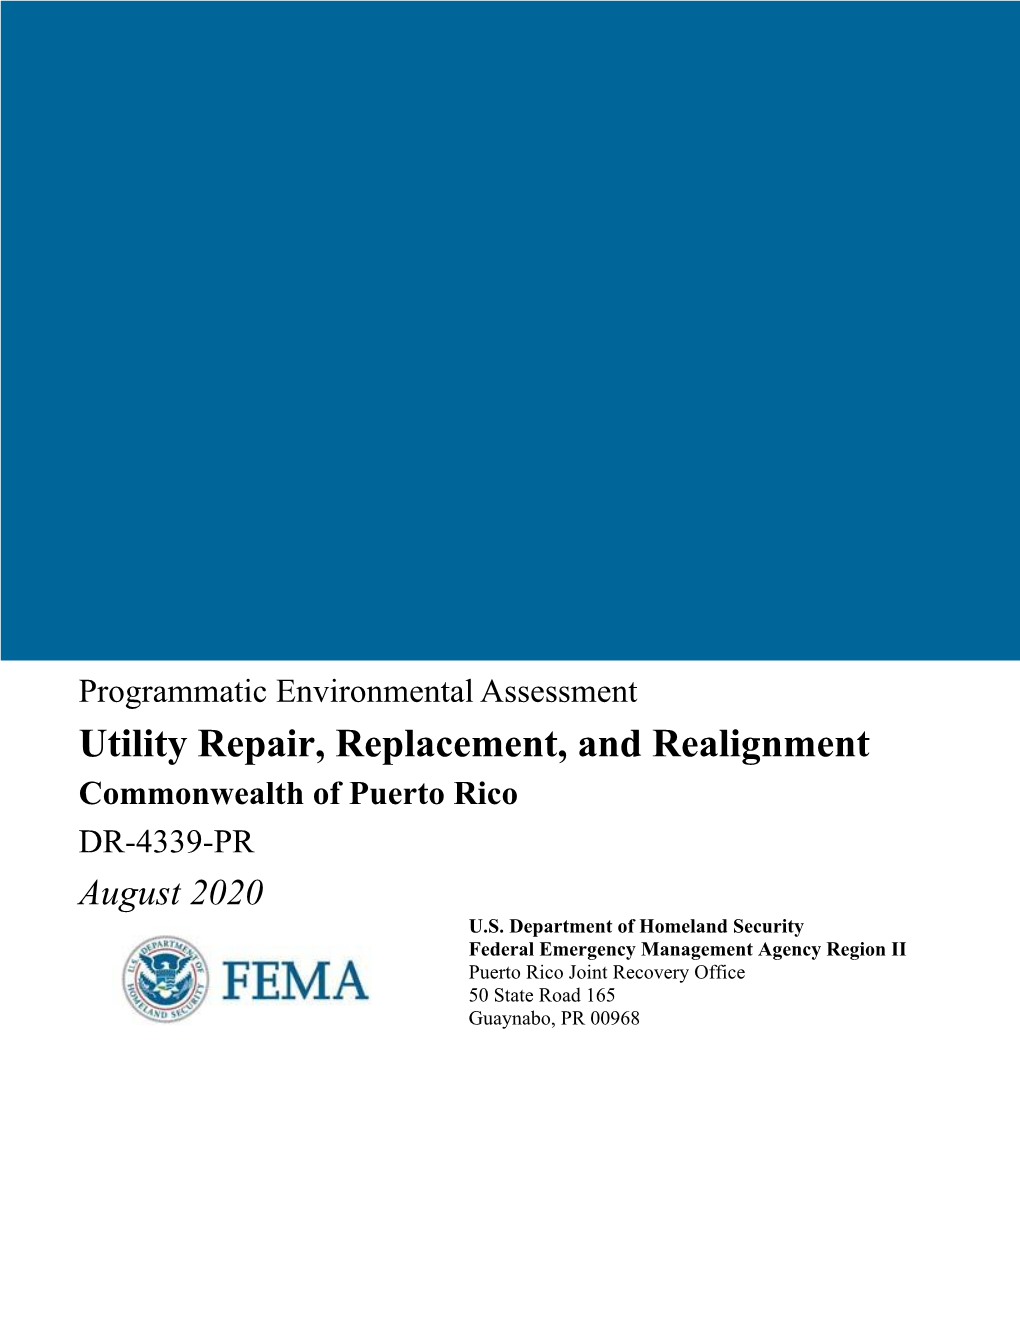 Utility Repair, Replacement, and Realignment Commonwealth of Puerto Rico DR-4339-PR August 2020 U.S